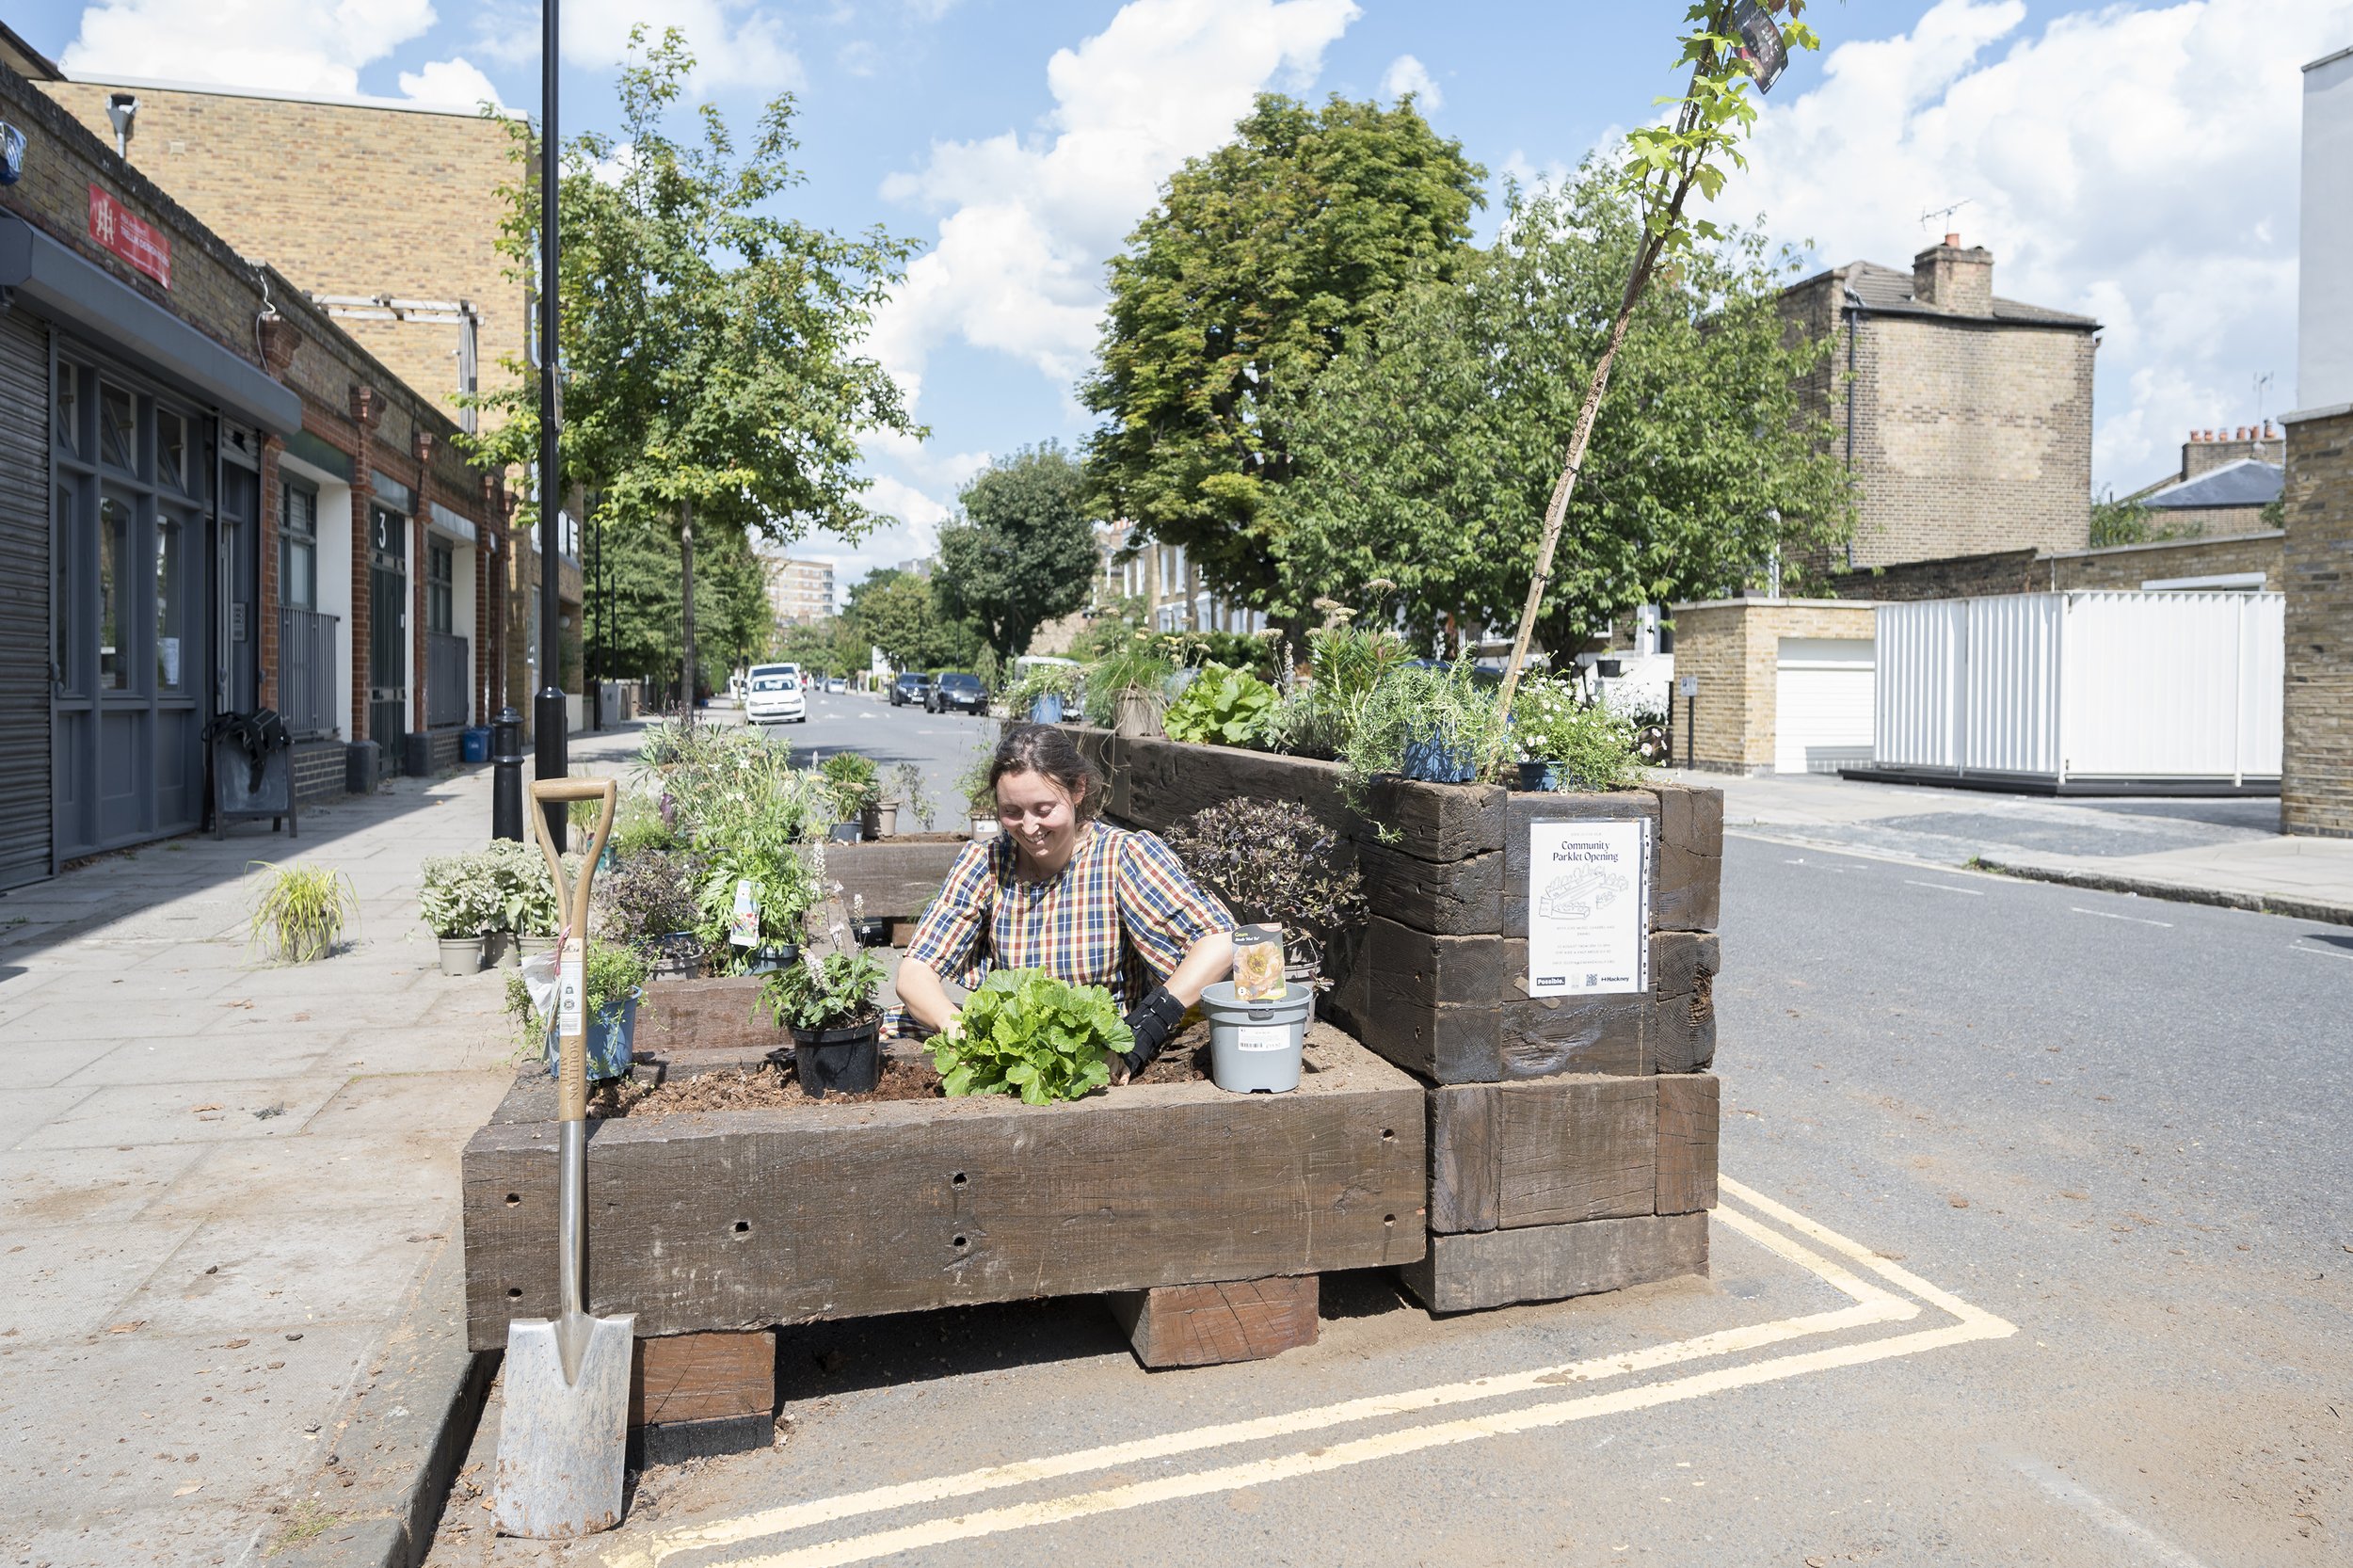 A similar parklet built from railway sleepers that we helped to create in Ardleigh Rd, Hackney.